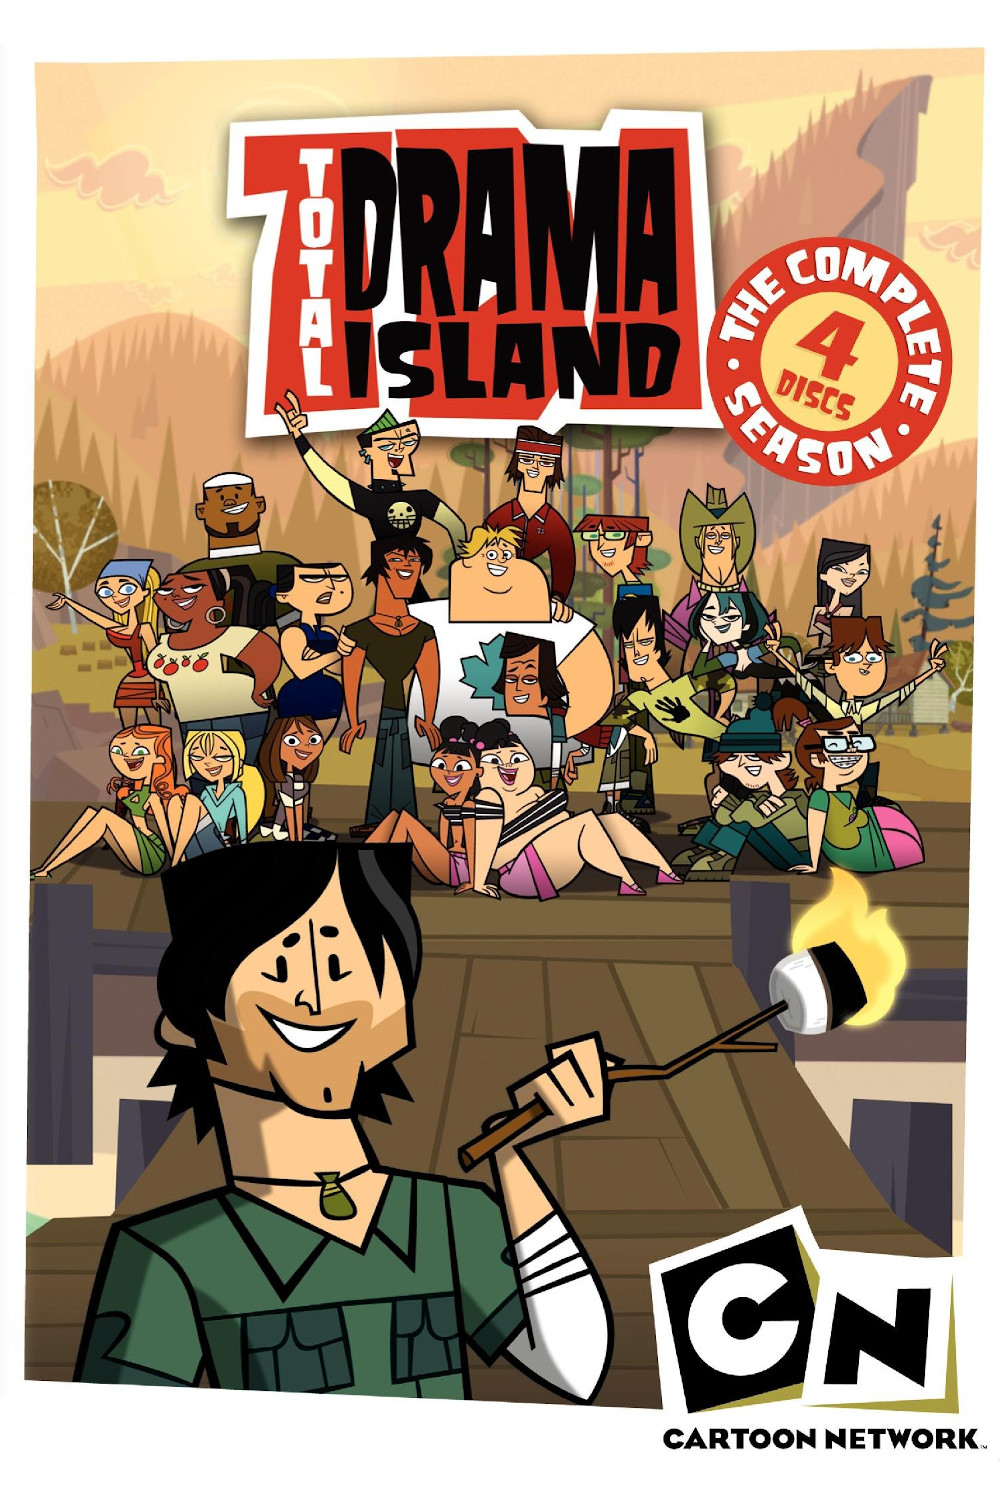 Central Total Drama